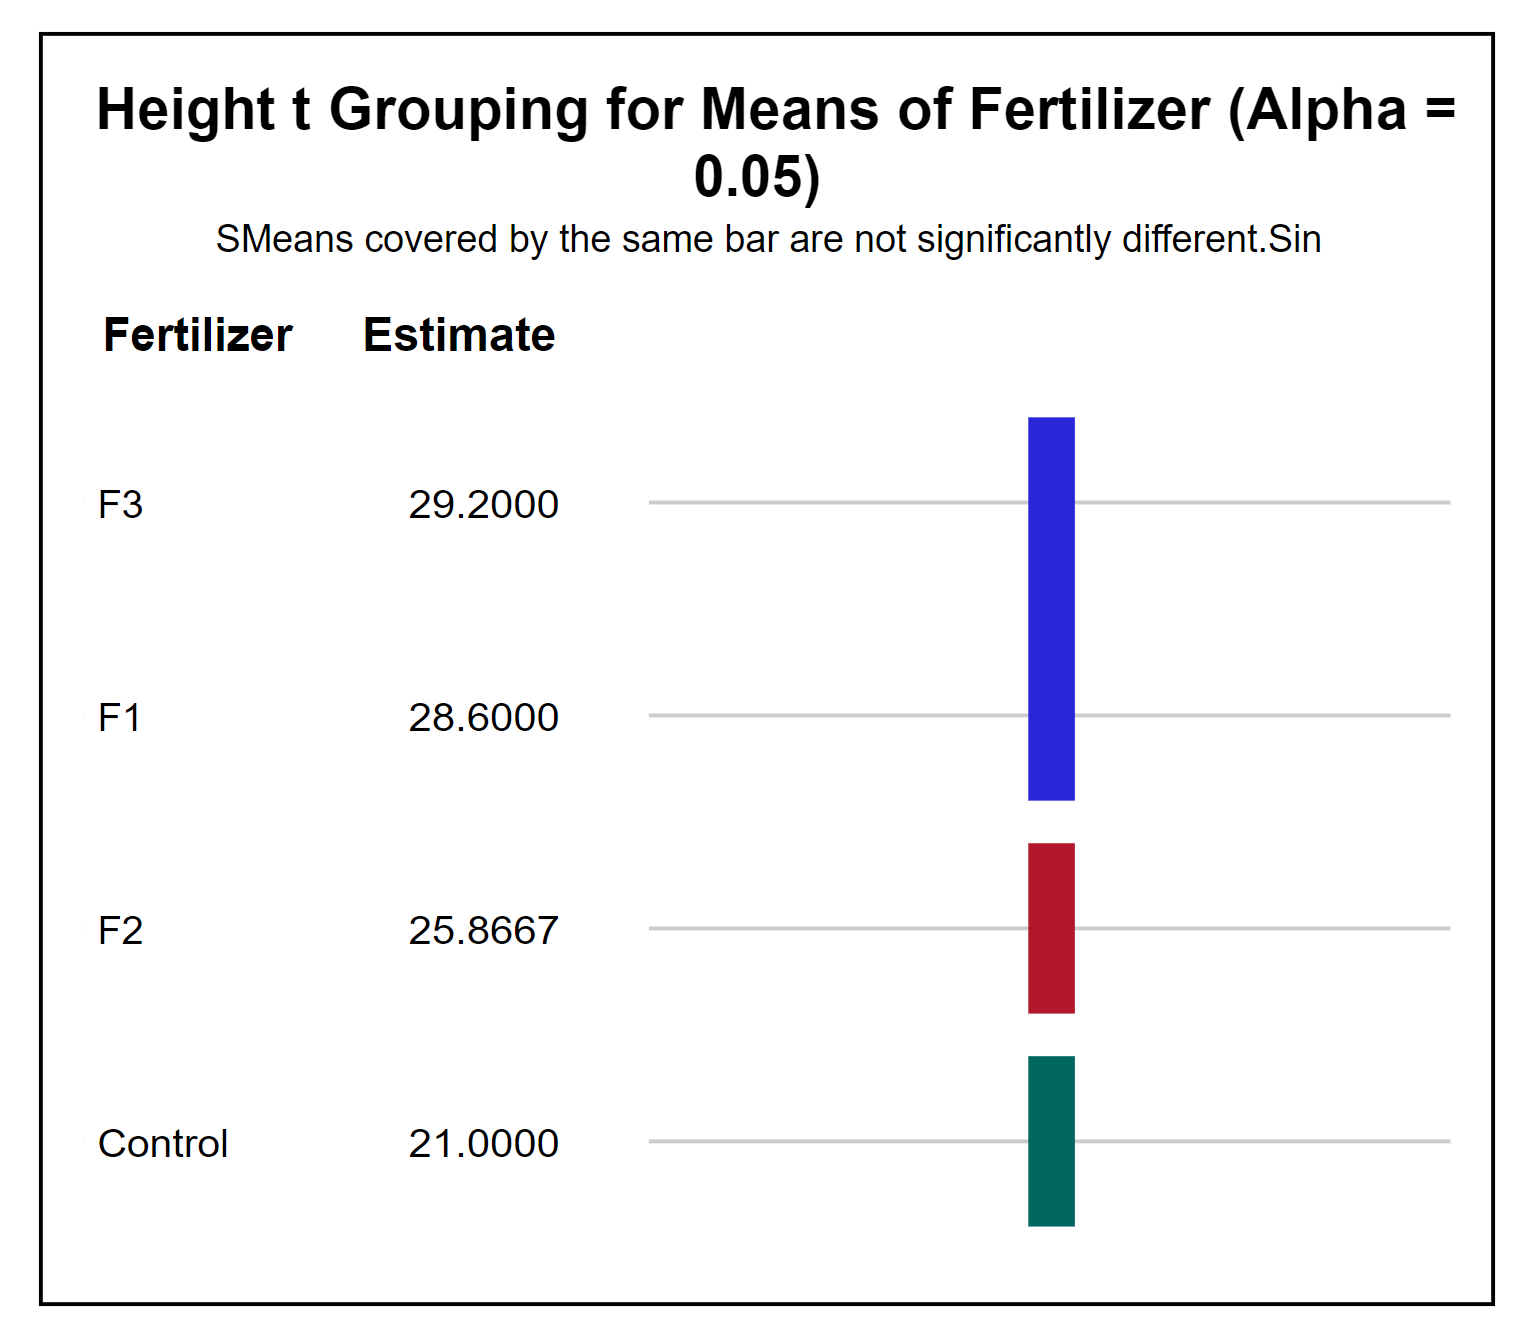 Height LSD grouping for means of fertilizer treatments show F3 and F1 covered with a single blue bar, F2 covered with a red bar, and Control covered by a green bar.